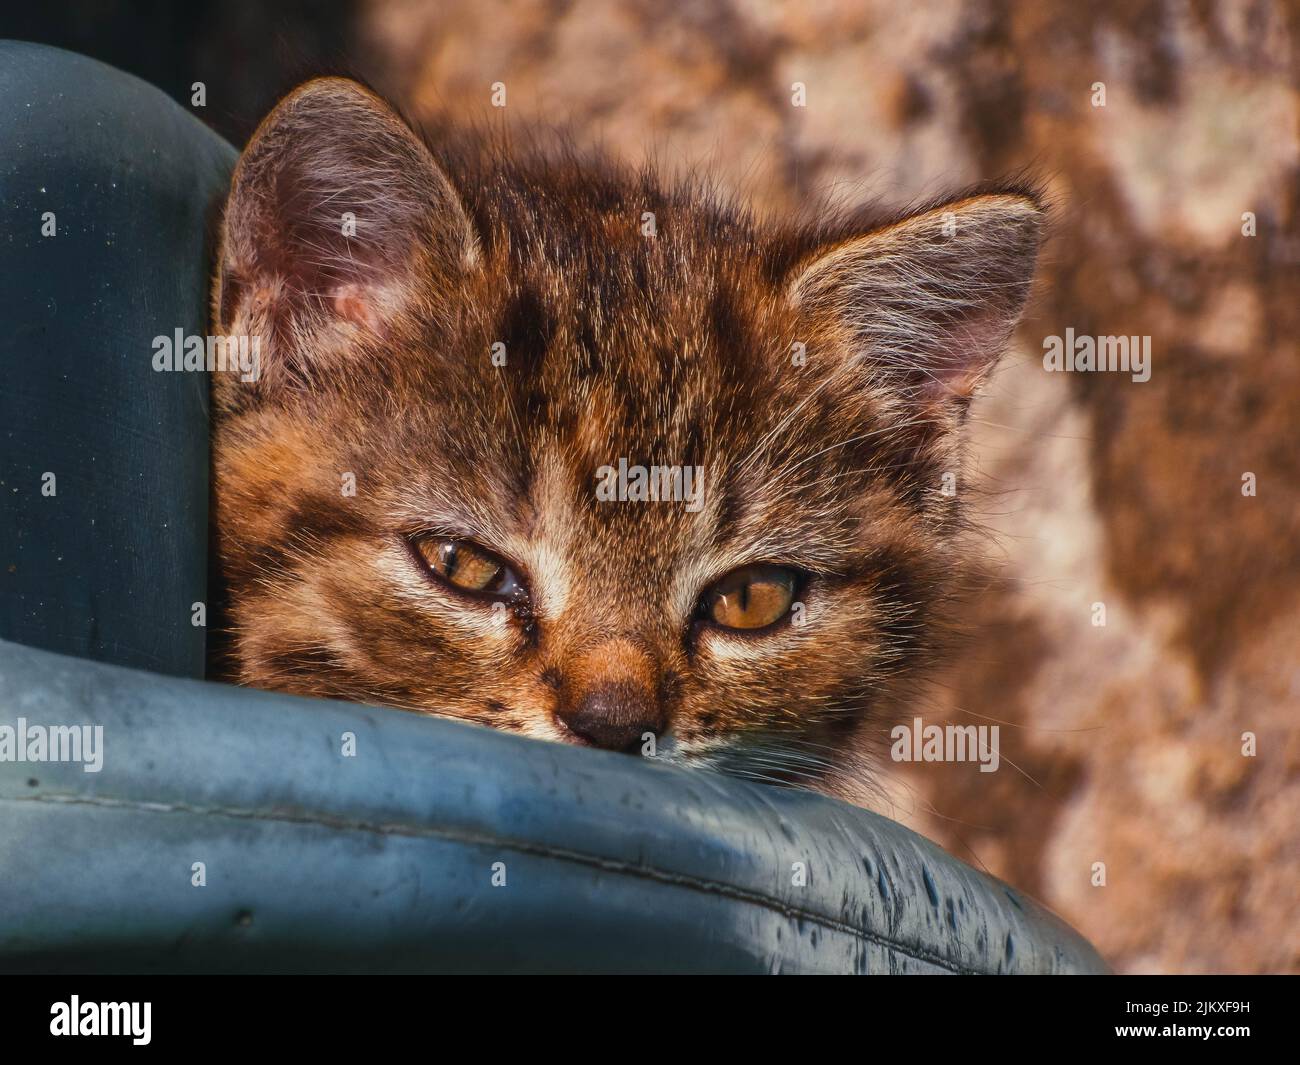 A closeup of a cute brown striped cat with brown eyes. Stock Photo